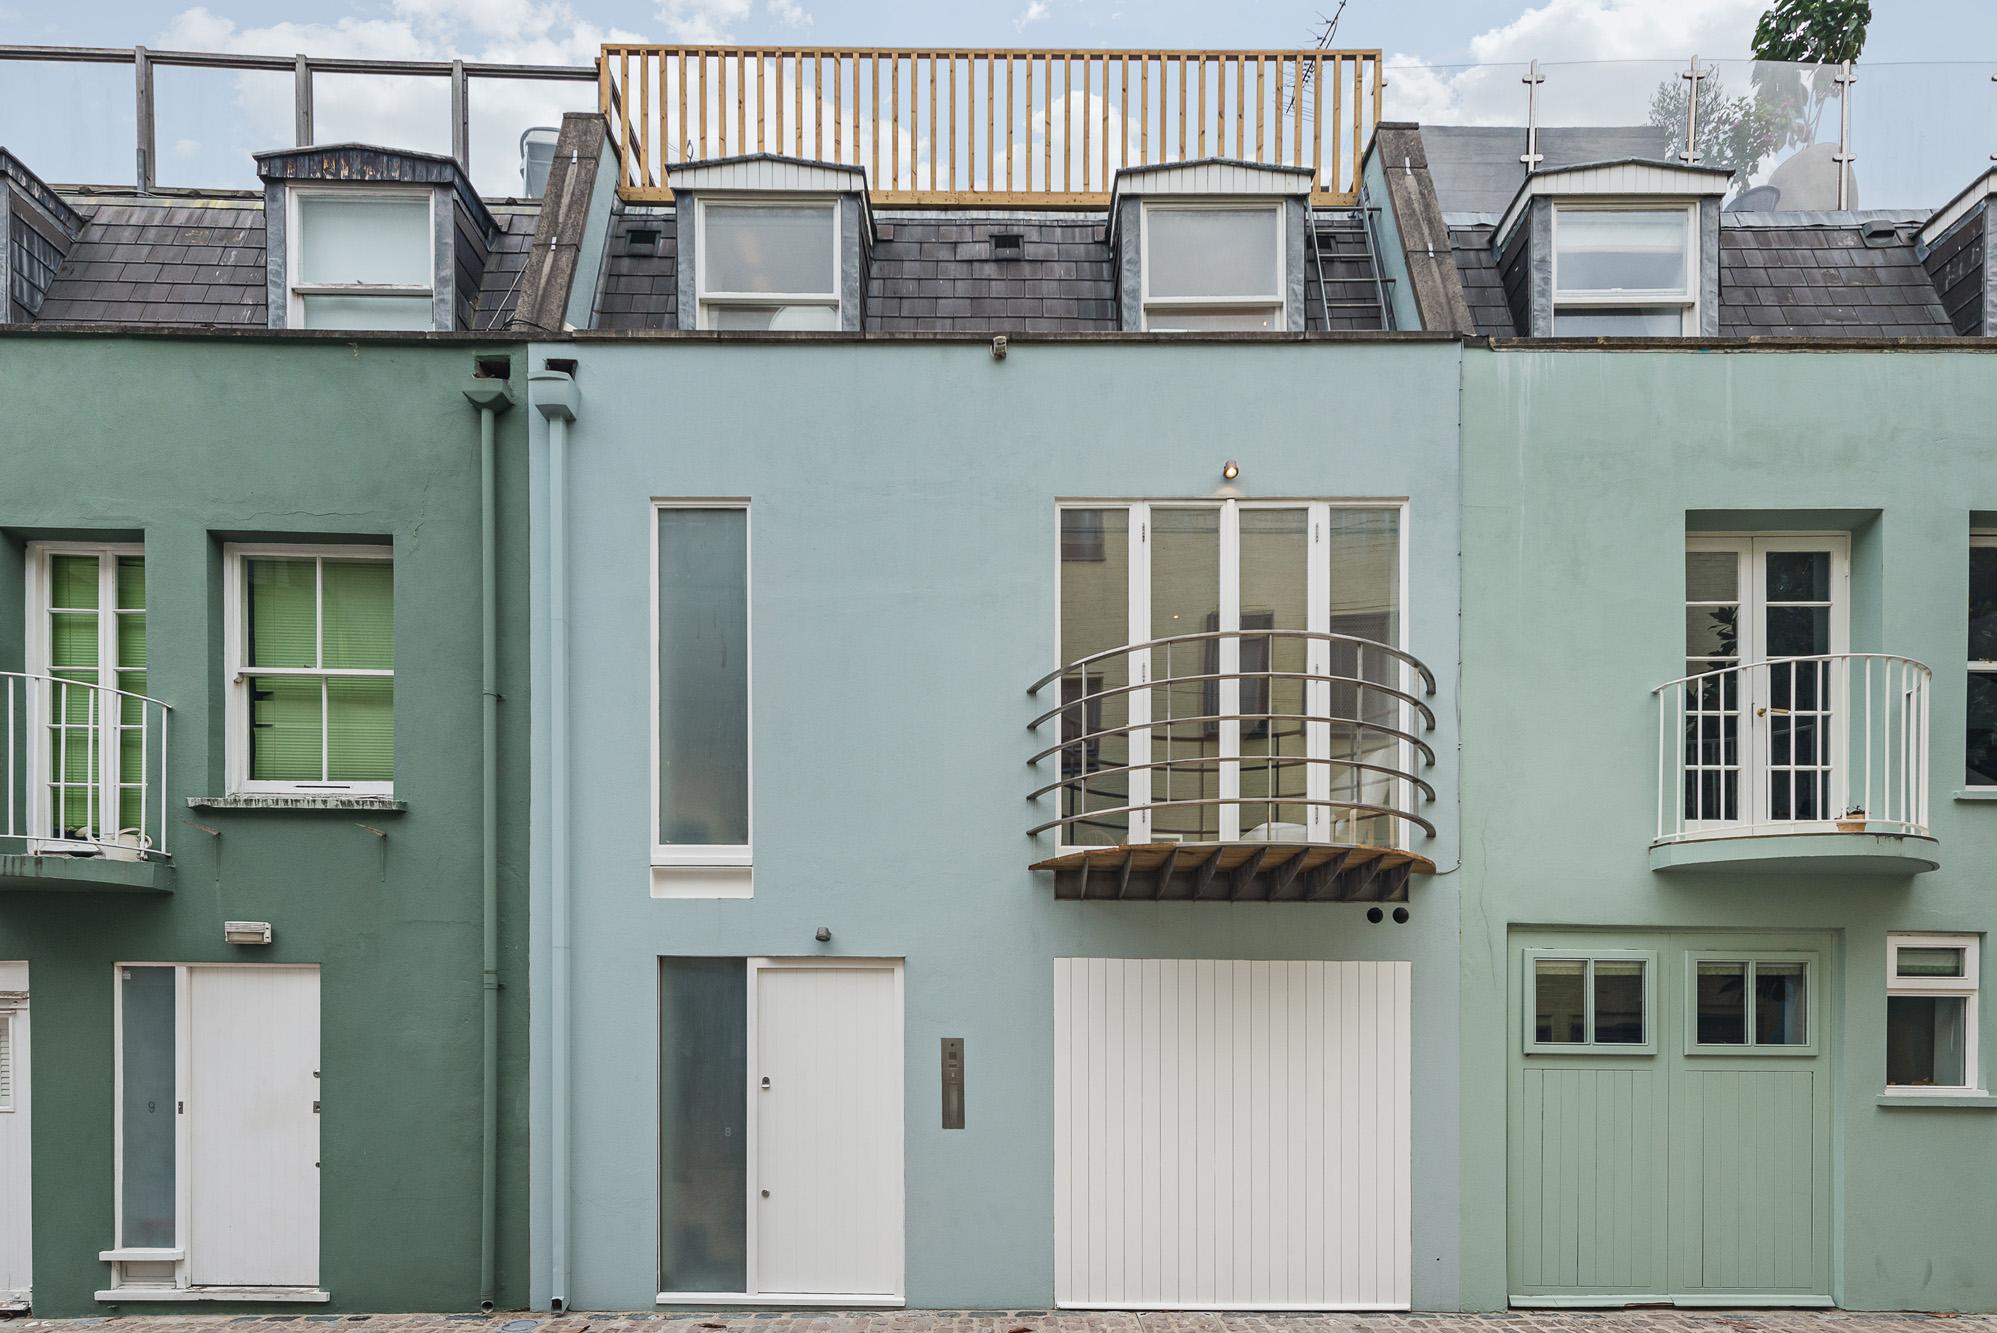 For sale Alba Place Notting Hill W11 pale blue facade